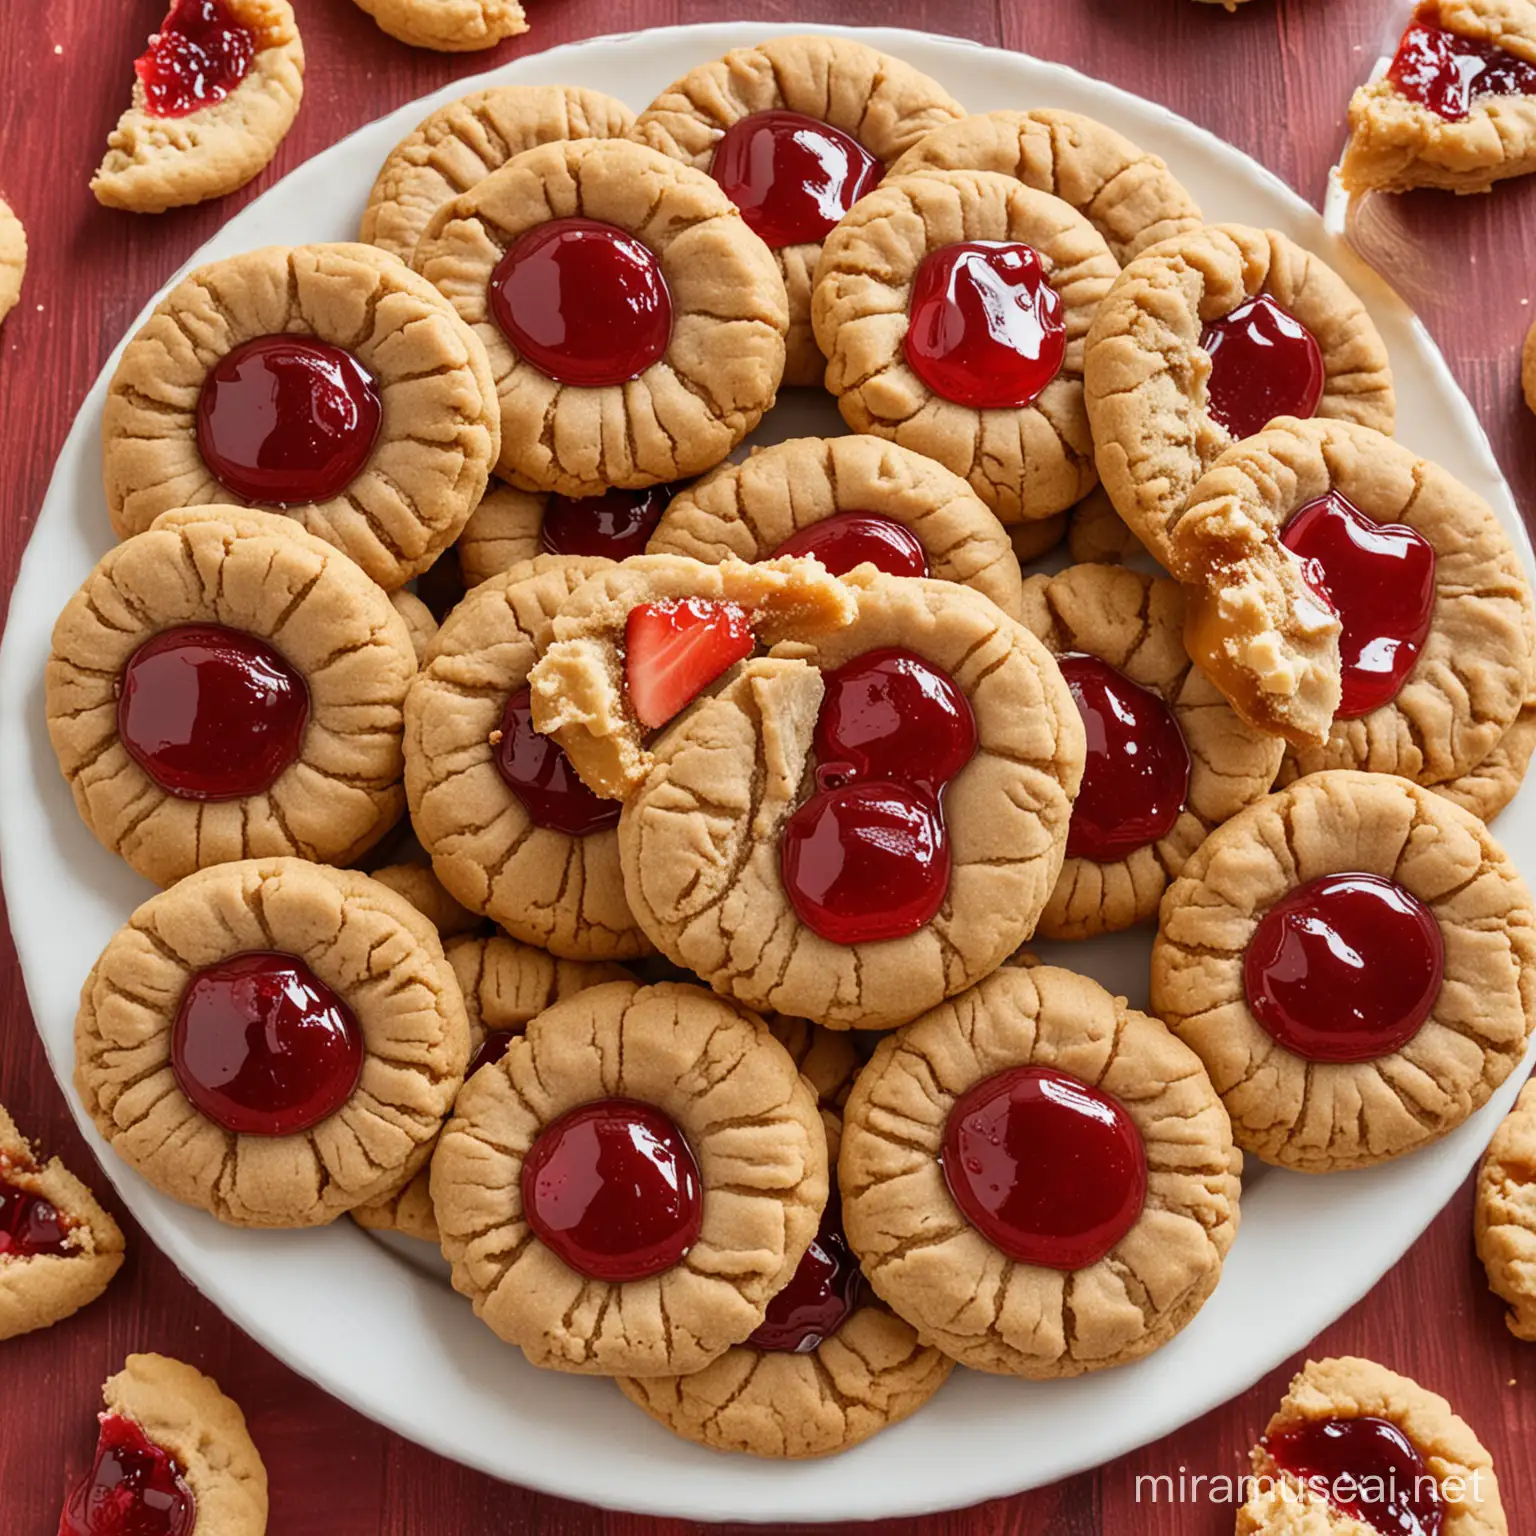 peanut butter cookies with strawberry jelly in the center